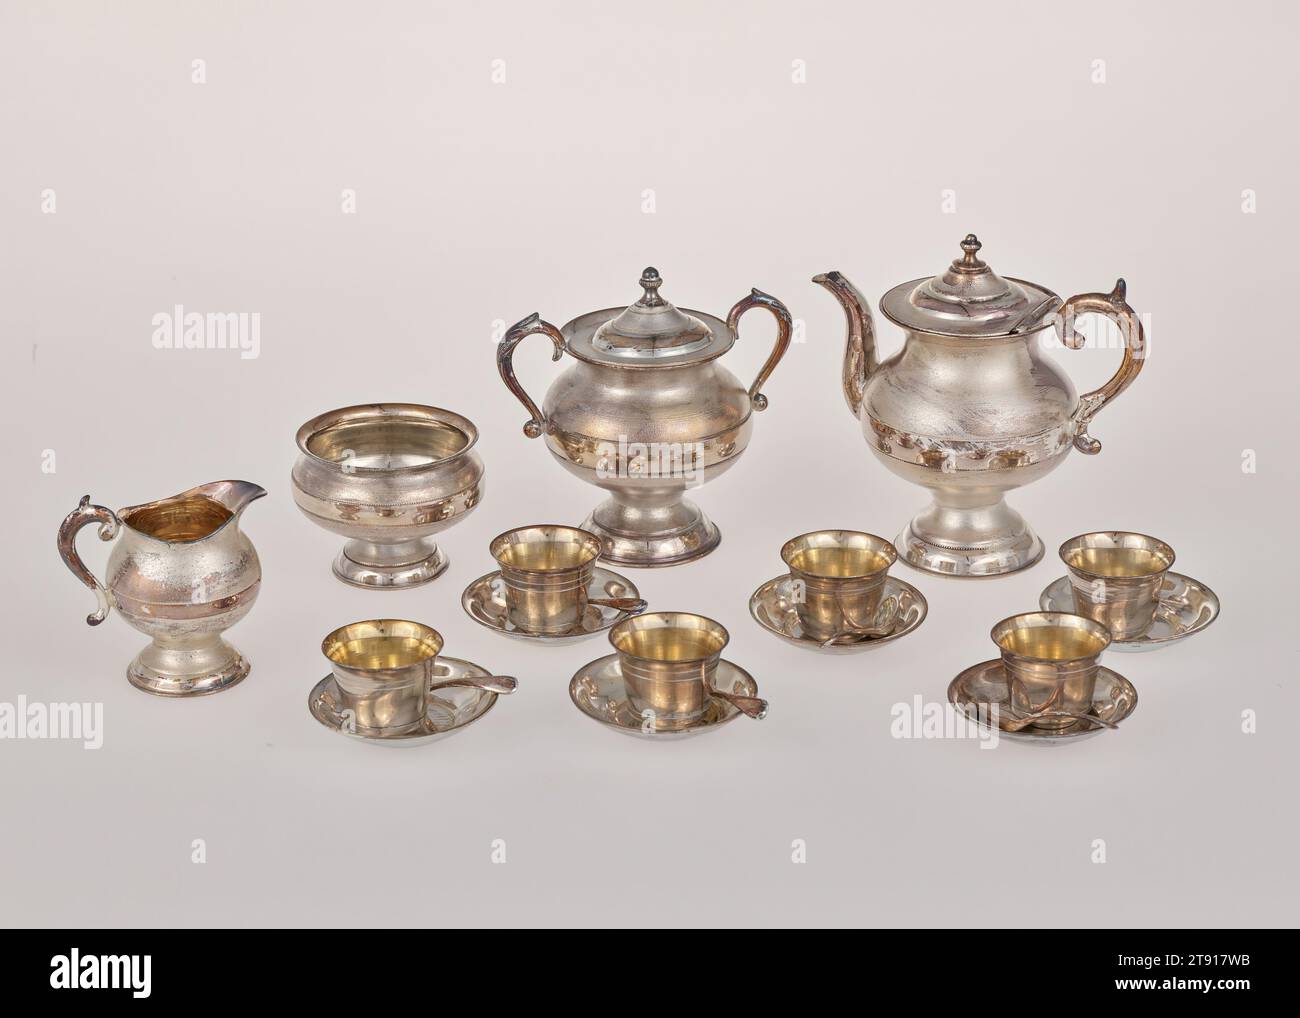 Creamer, from a children's tea service, c. 1875, James Tuff, 2 3/8 x 2 7/16 x 1 3/4 in. (6.03 x 6.19 x 4.45 cm), Silver plated pewter, United States, 19th century Stock Photo